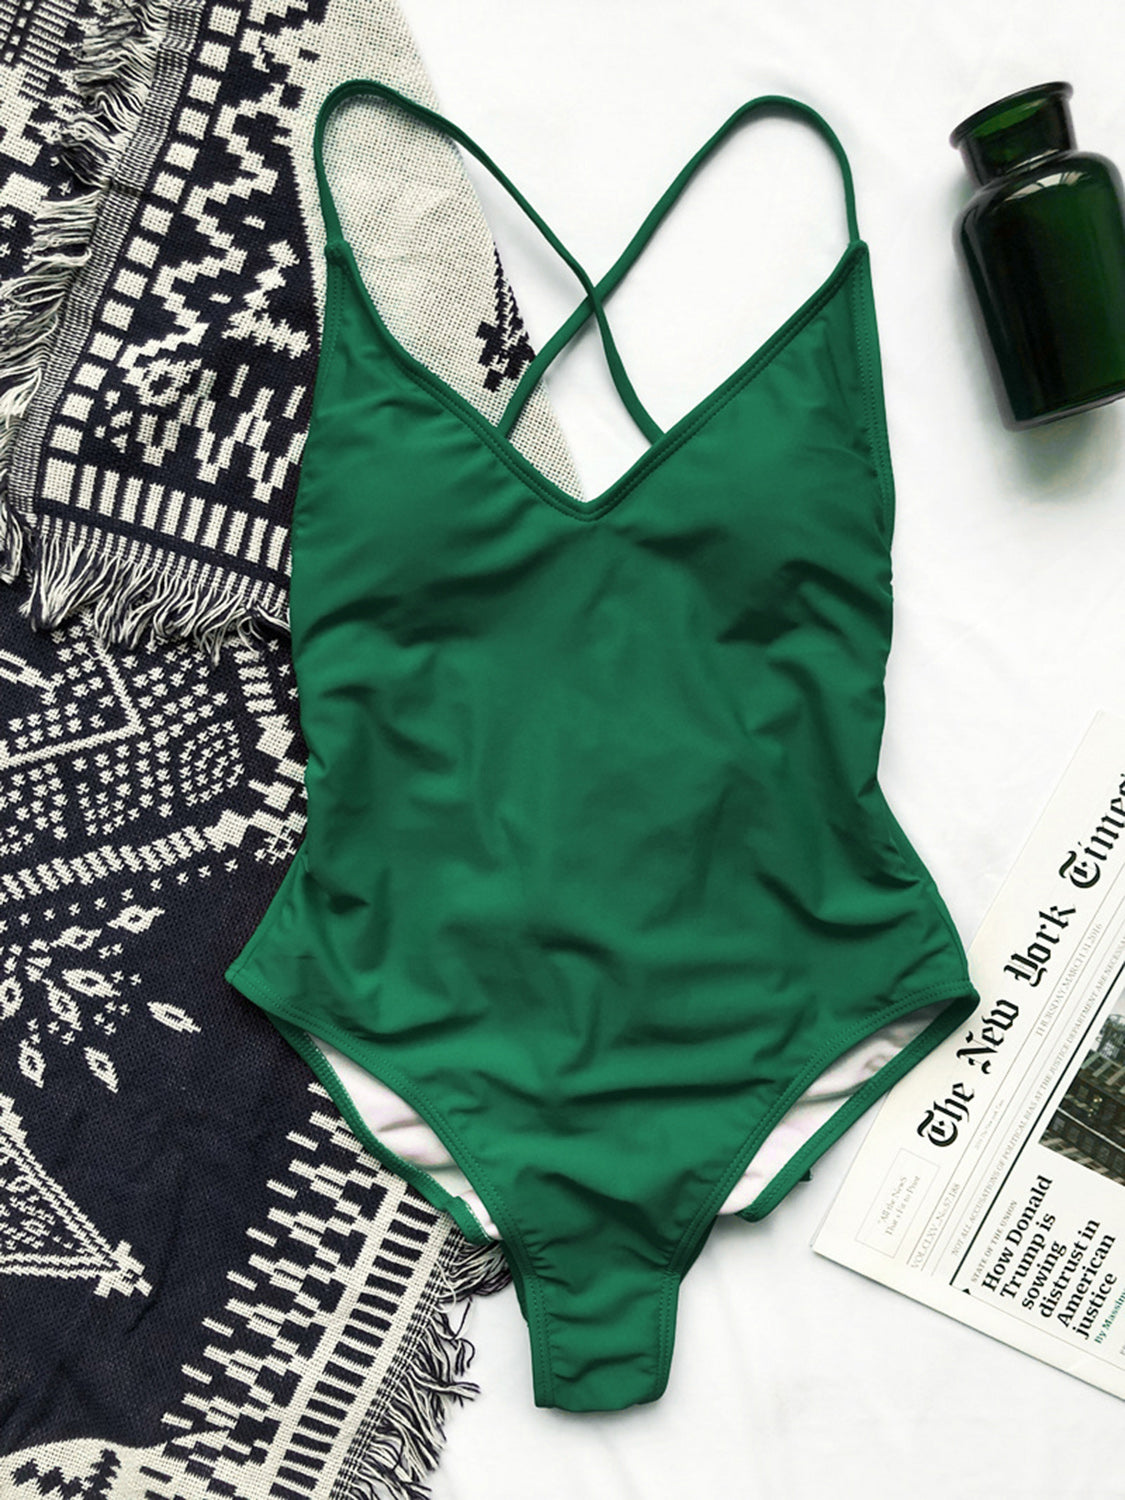 Elevate beach days with our chic kelly green swimwear, featuring a unique crisscross design and customizable lace-up front for a perfect fit.